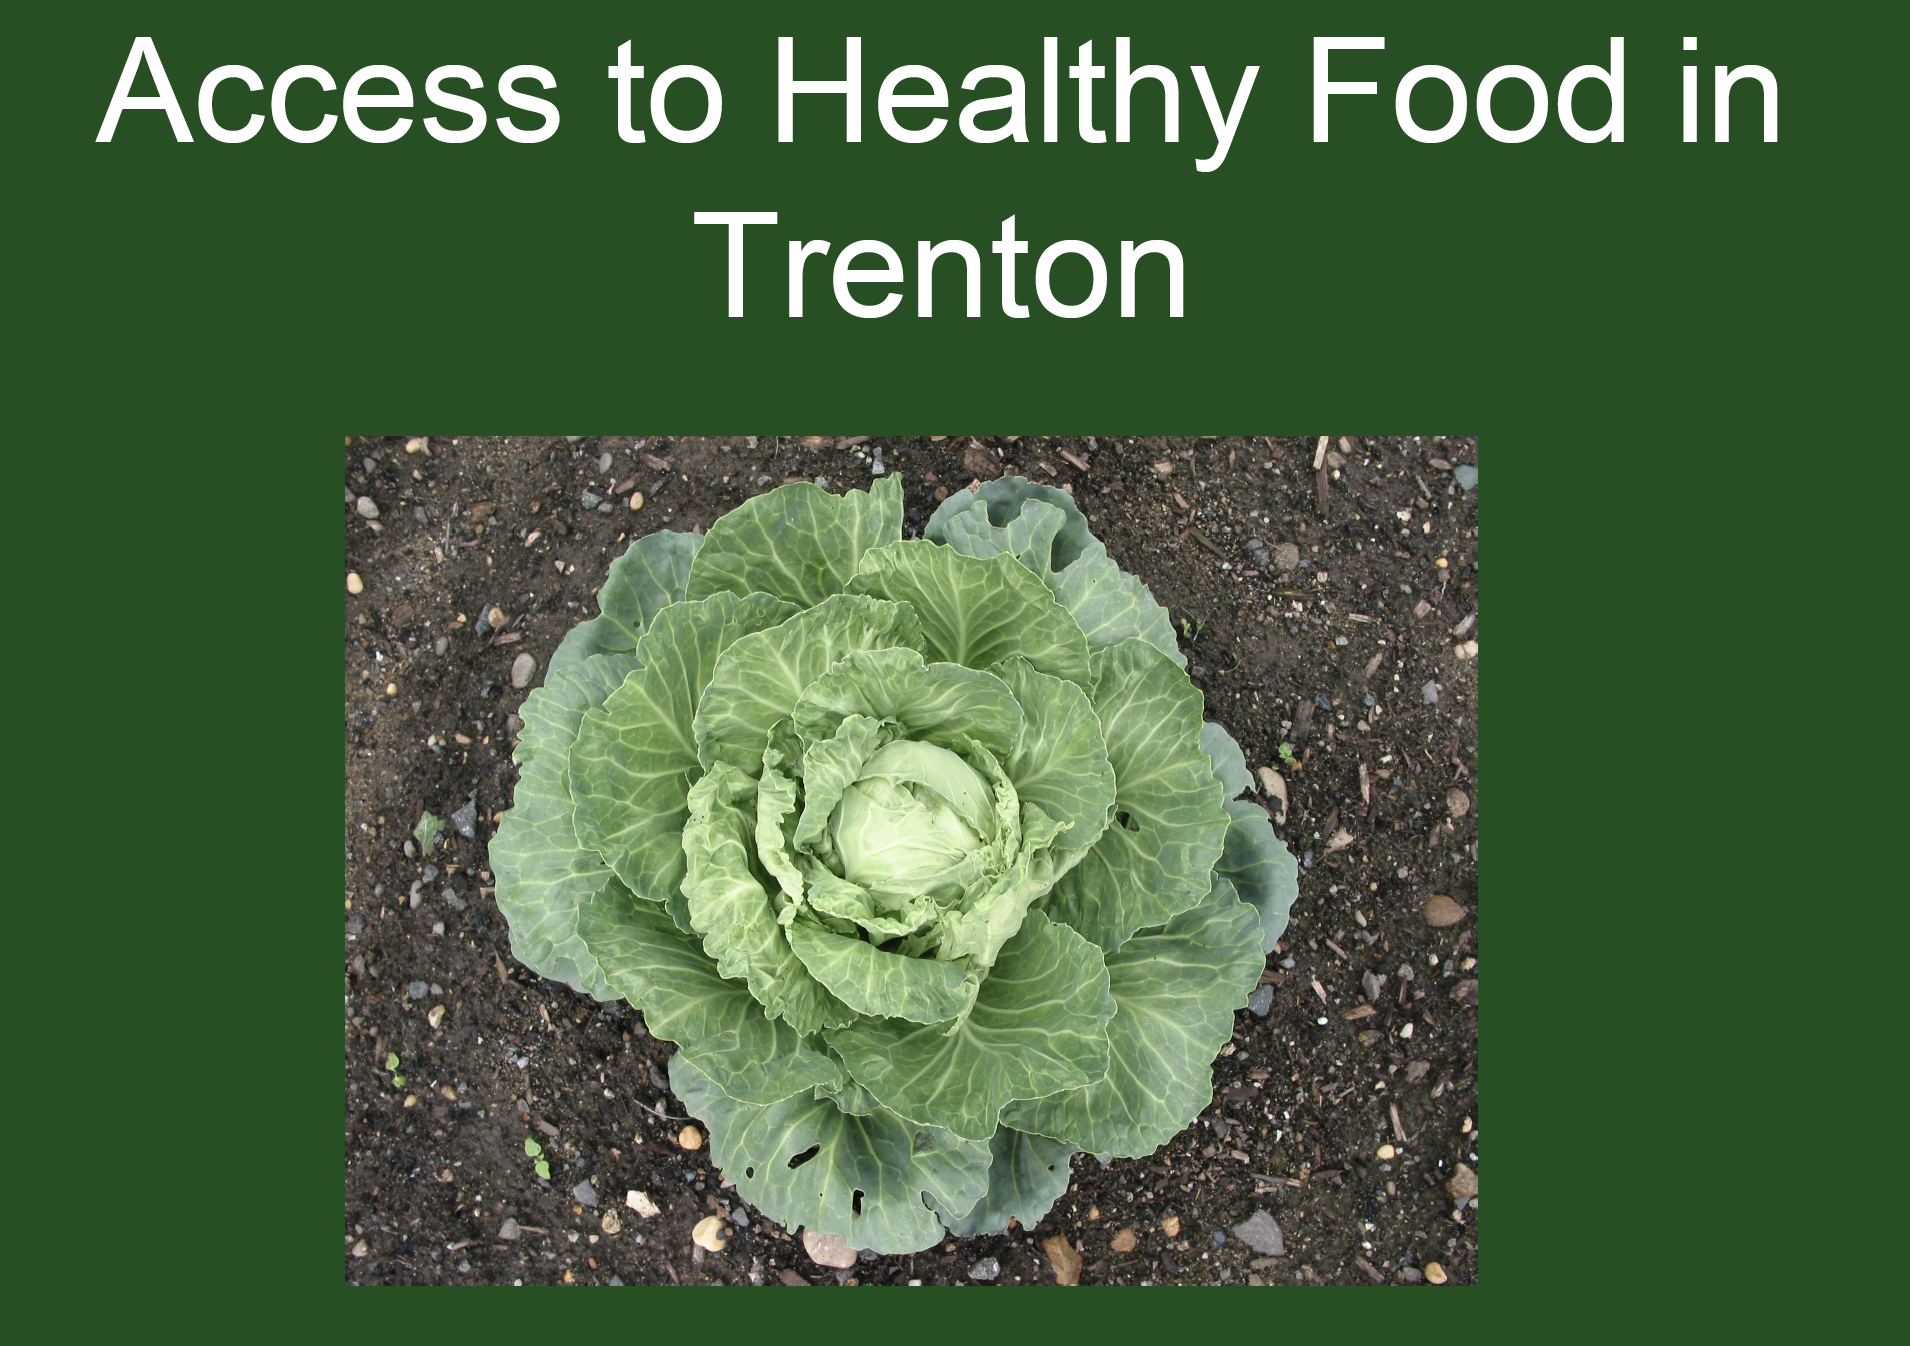 Access to Healthy Food in Trenton